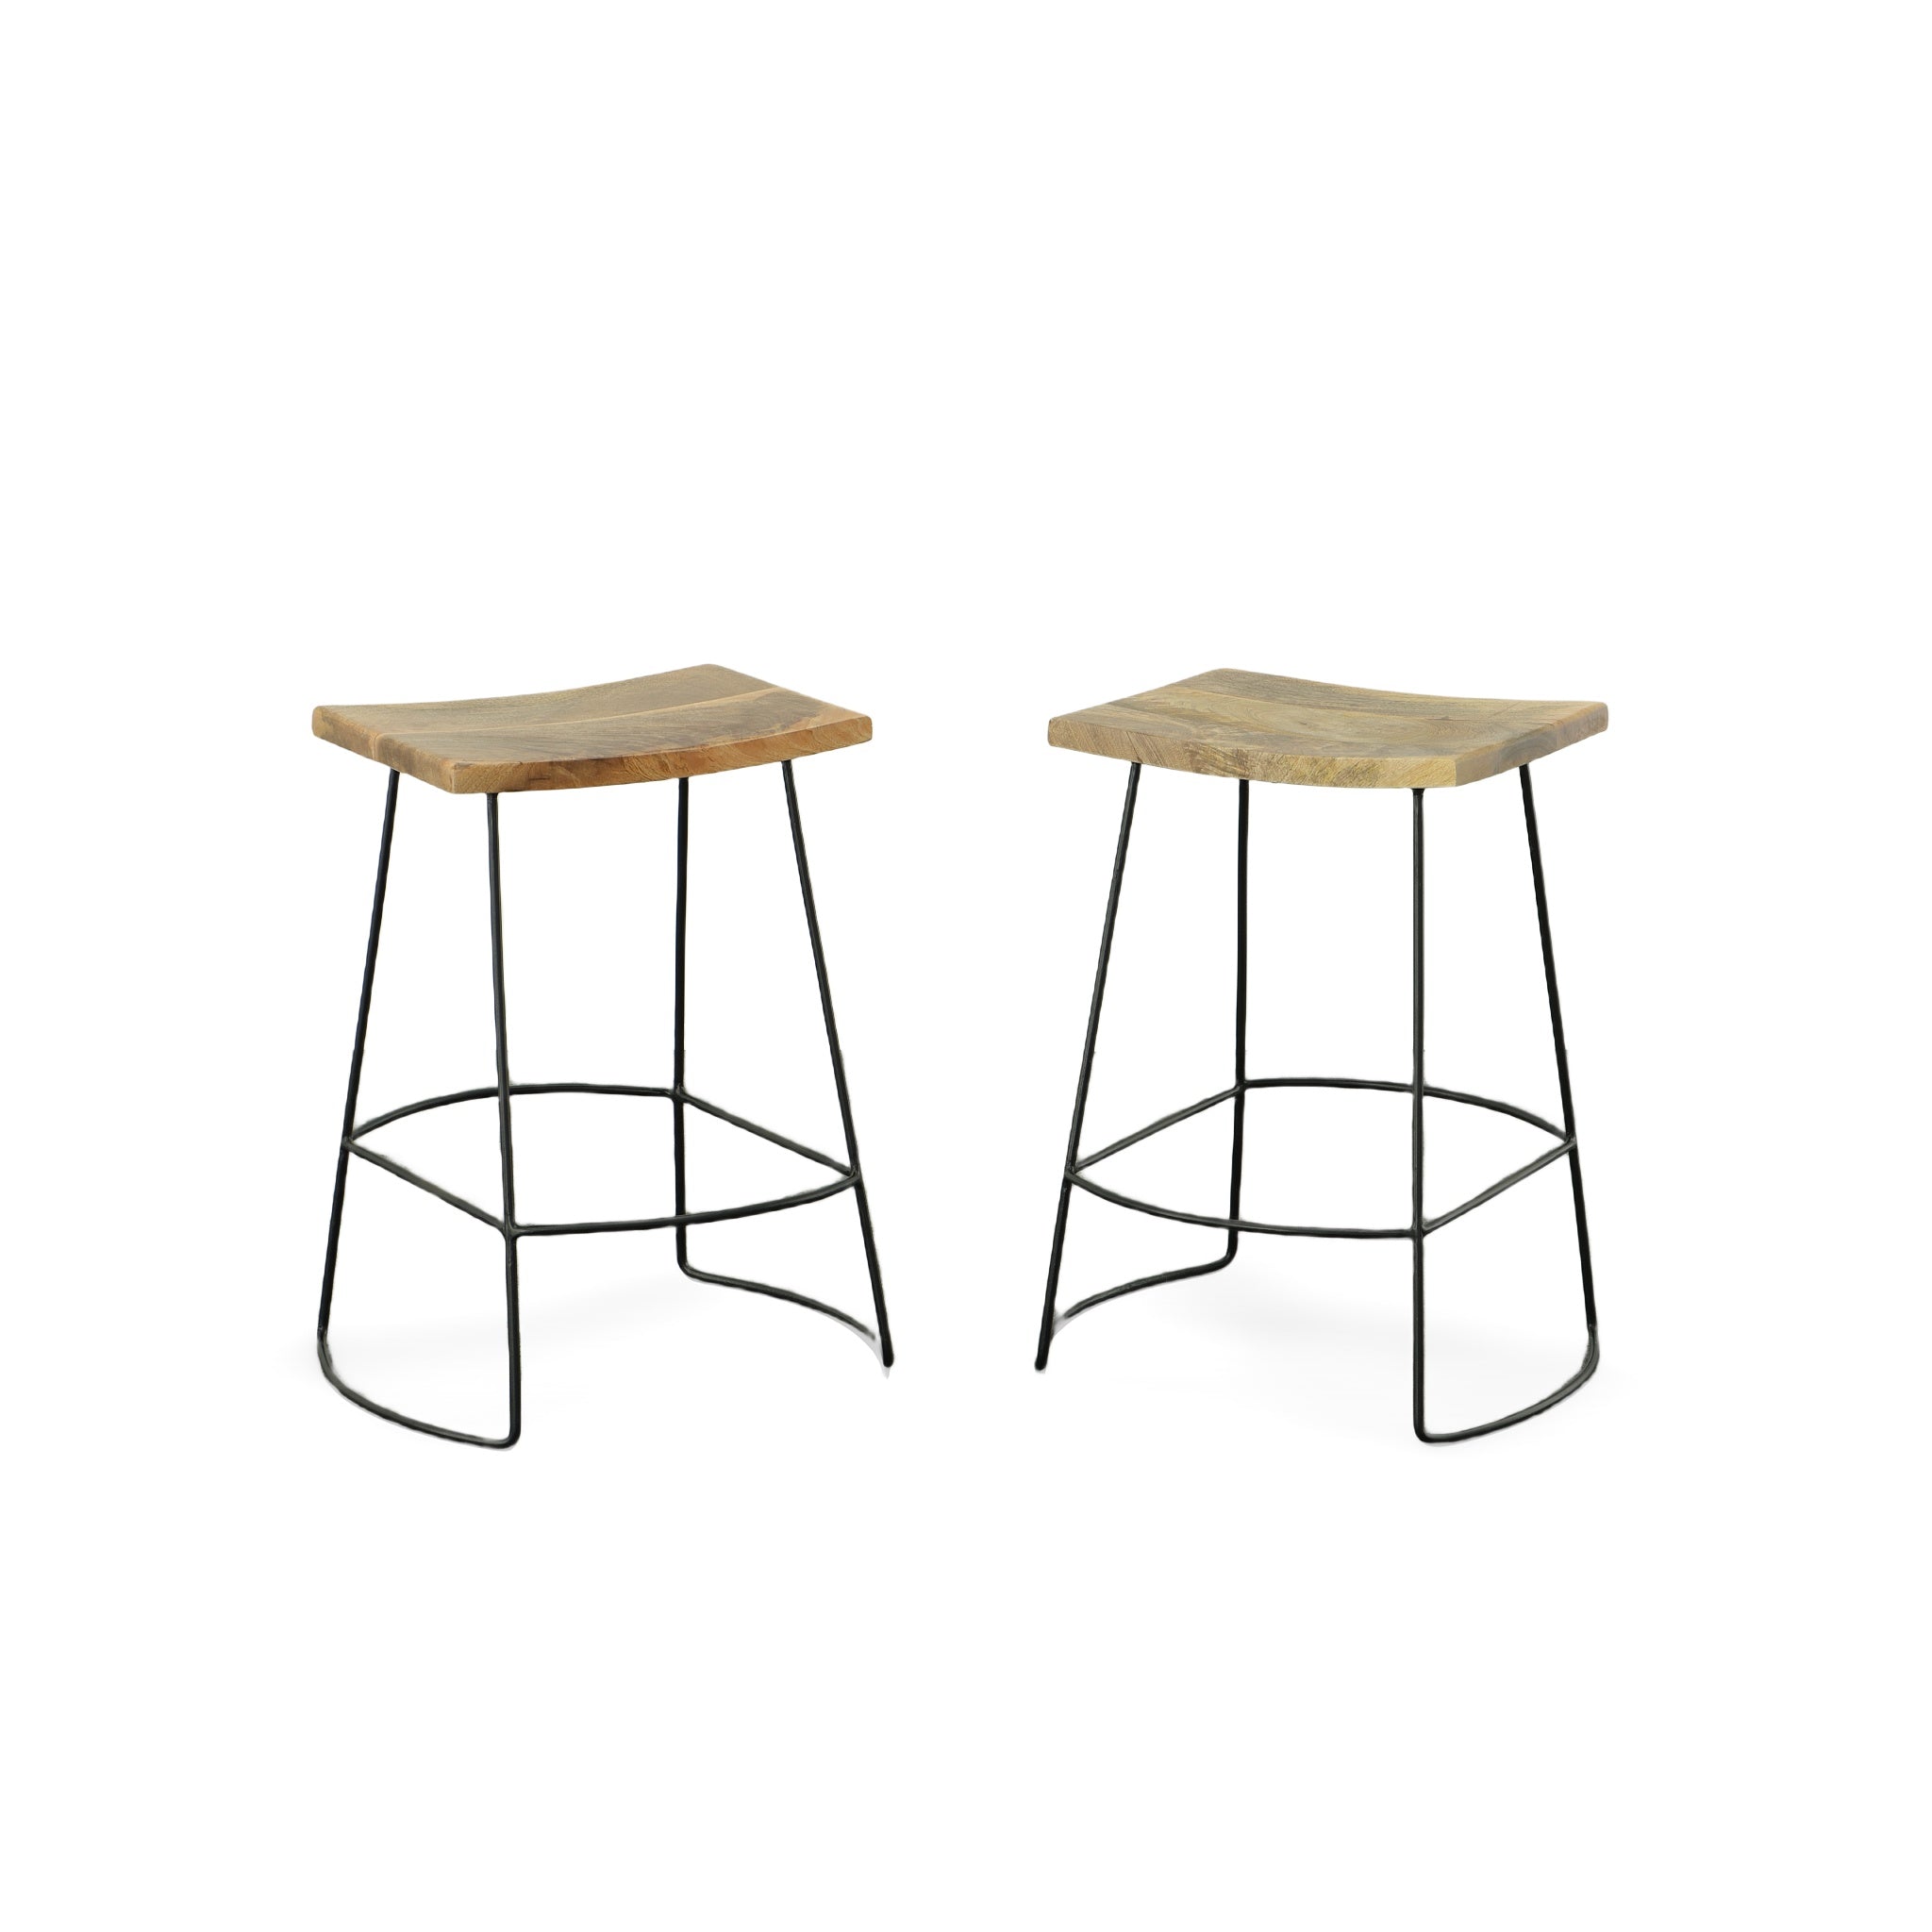 Reece 25 Inch Saddle Seat Counter Stool Set of 2 - Counter Stool